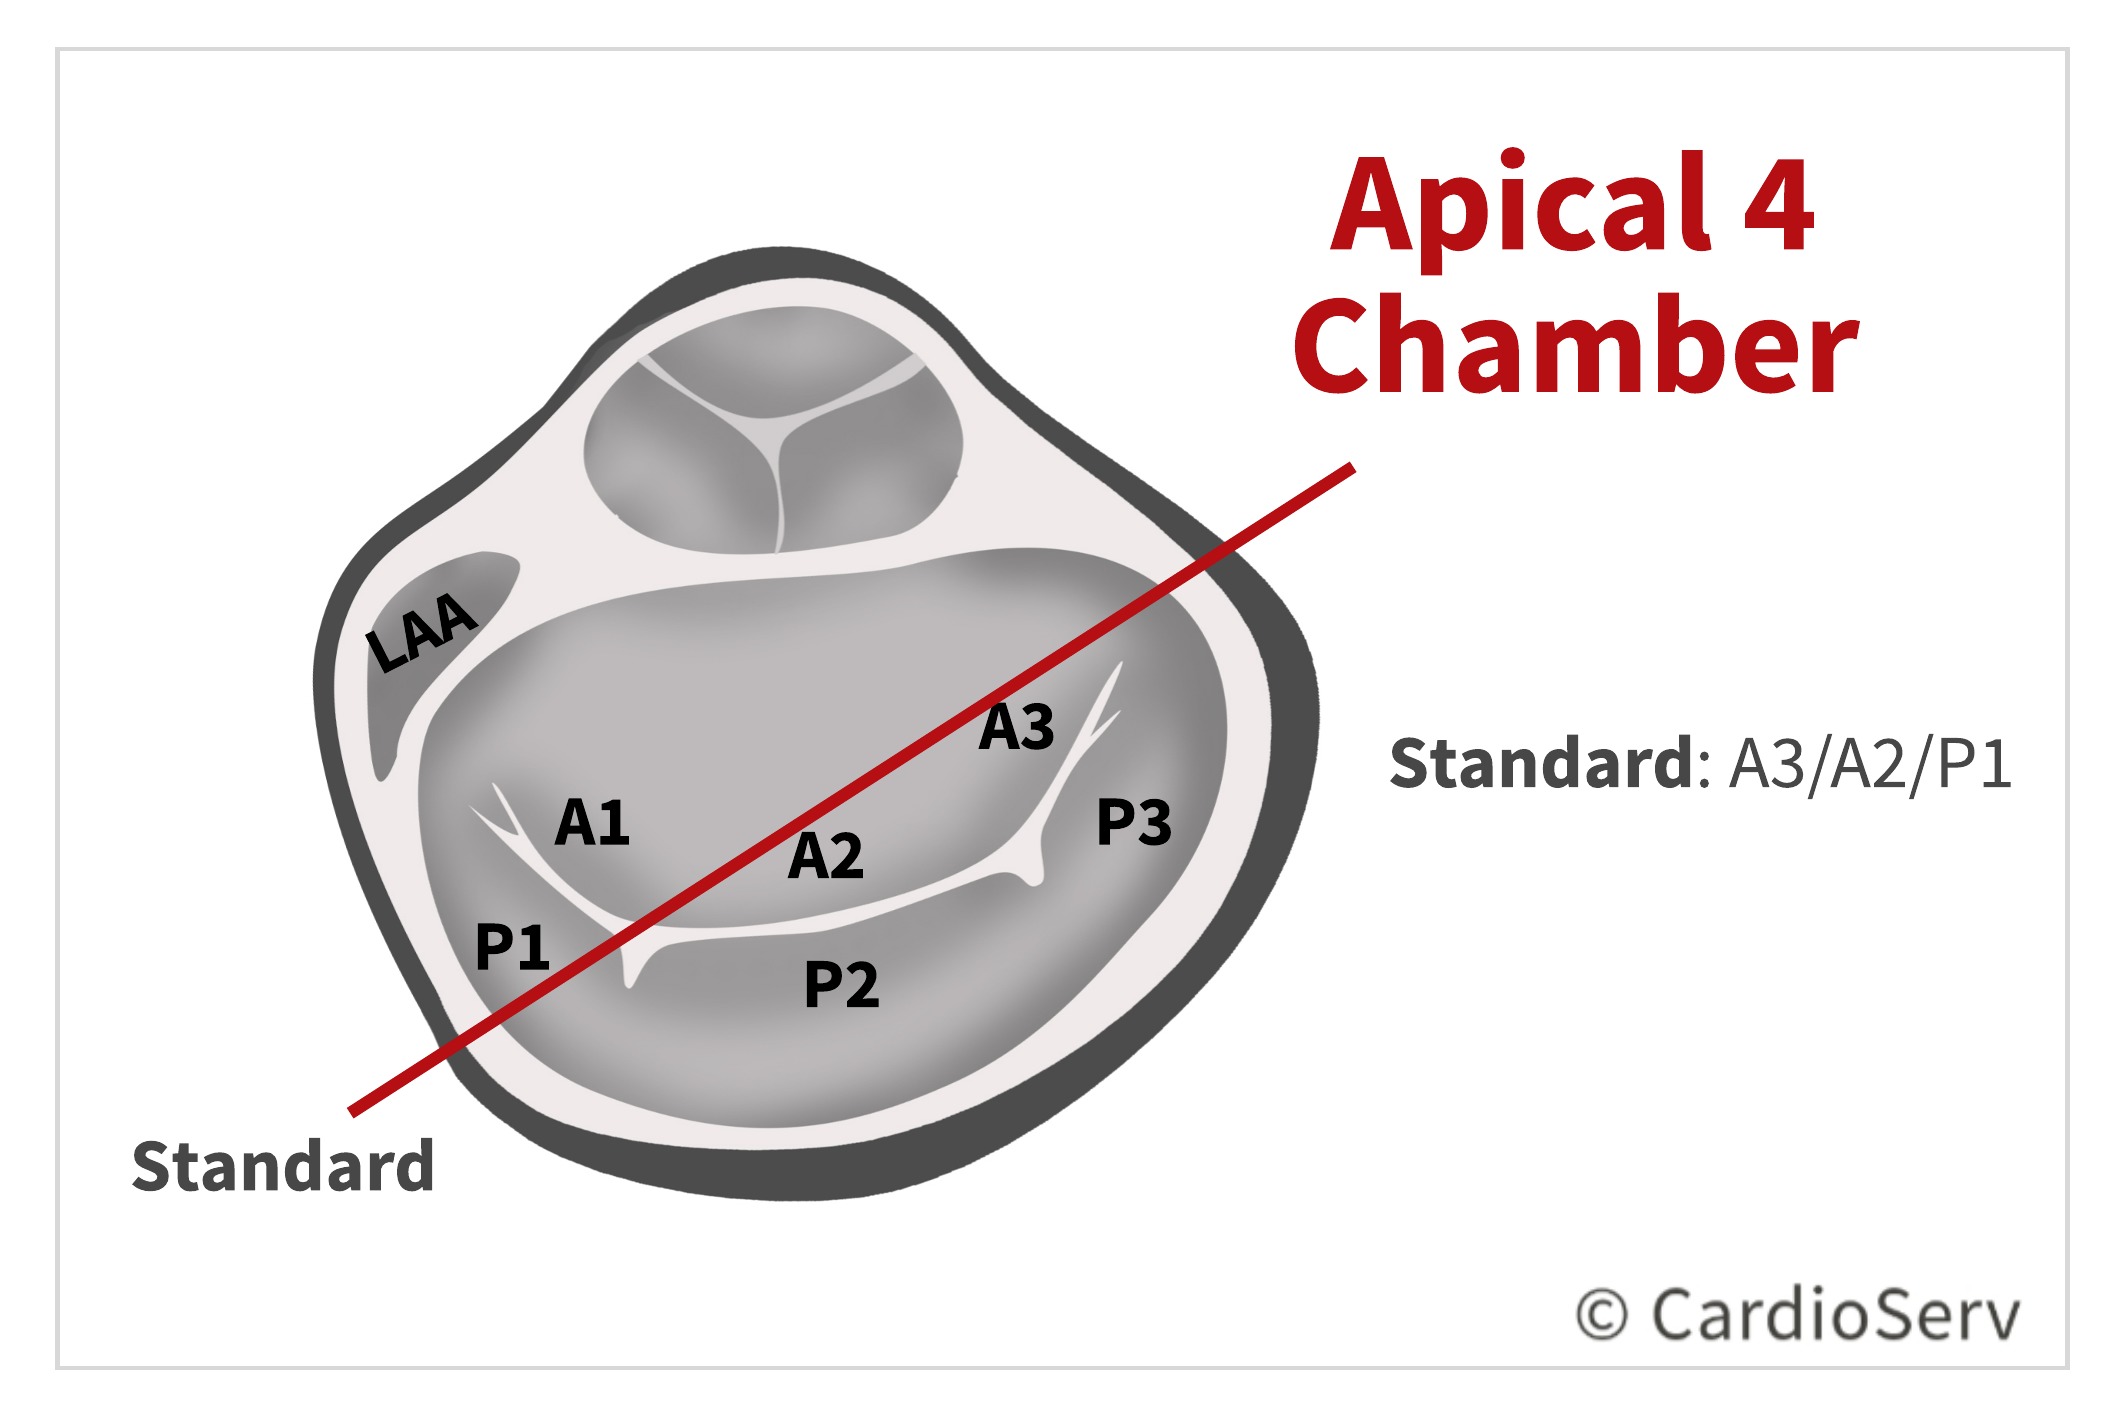 Apical 4 Chamber AP4 Mitral Valve Scallops Echo 